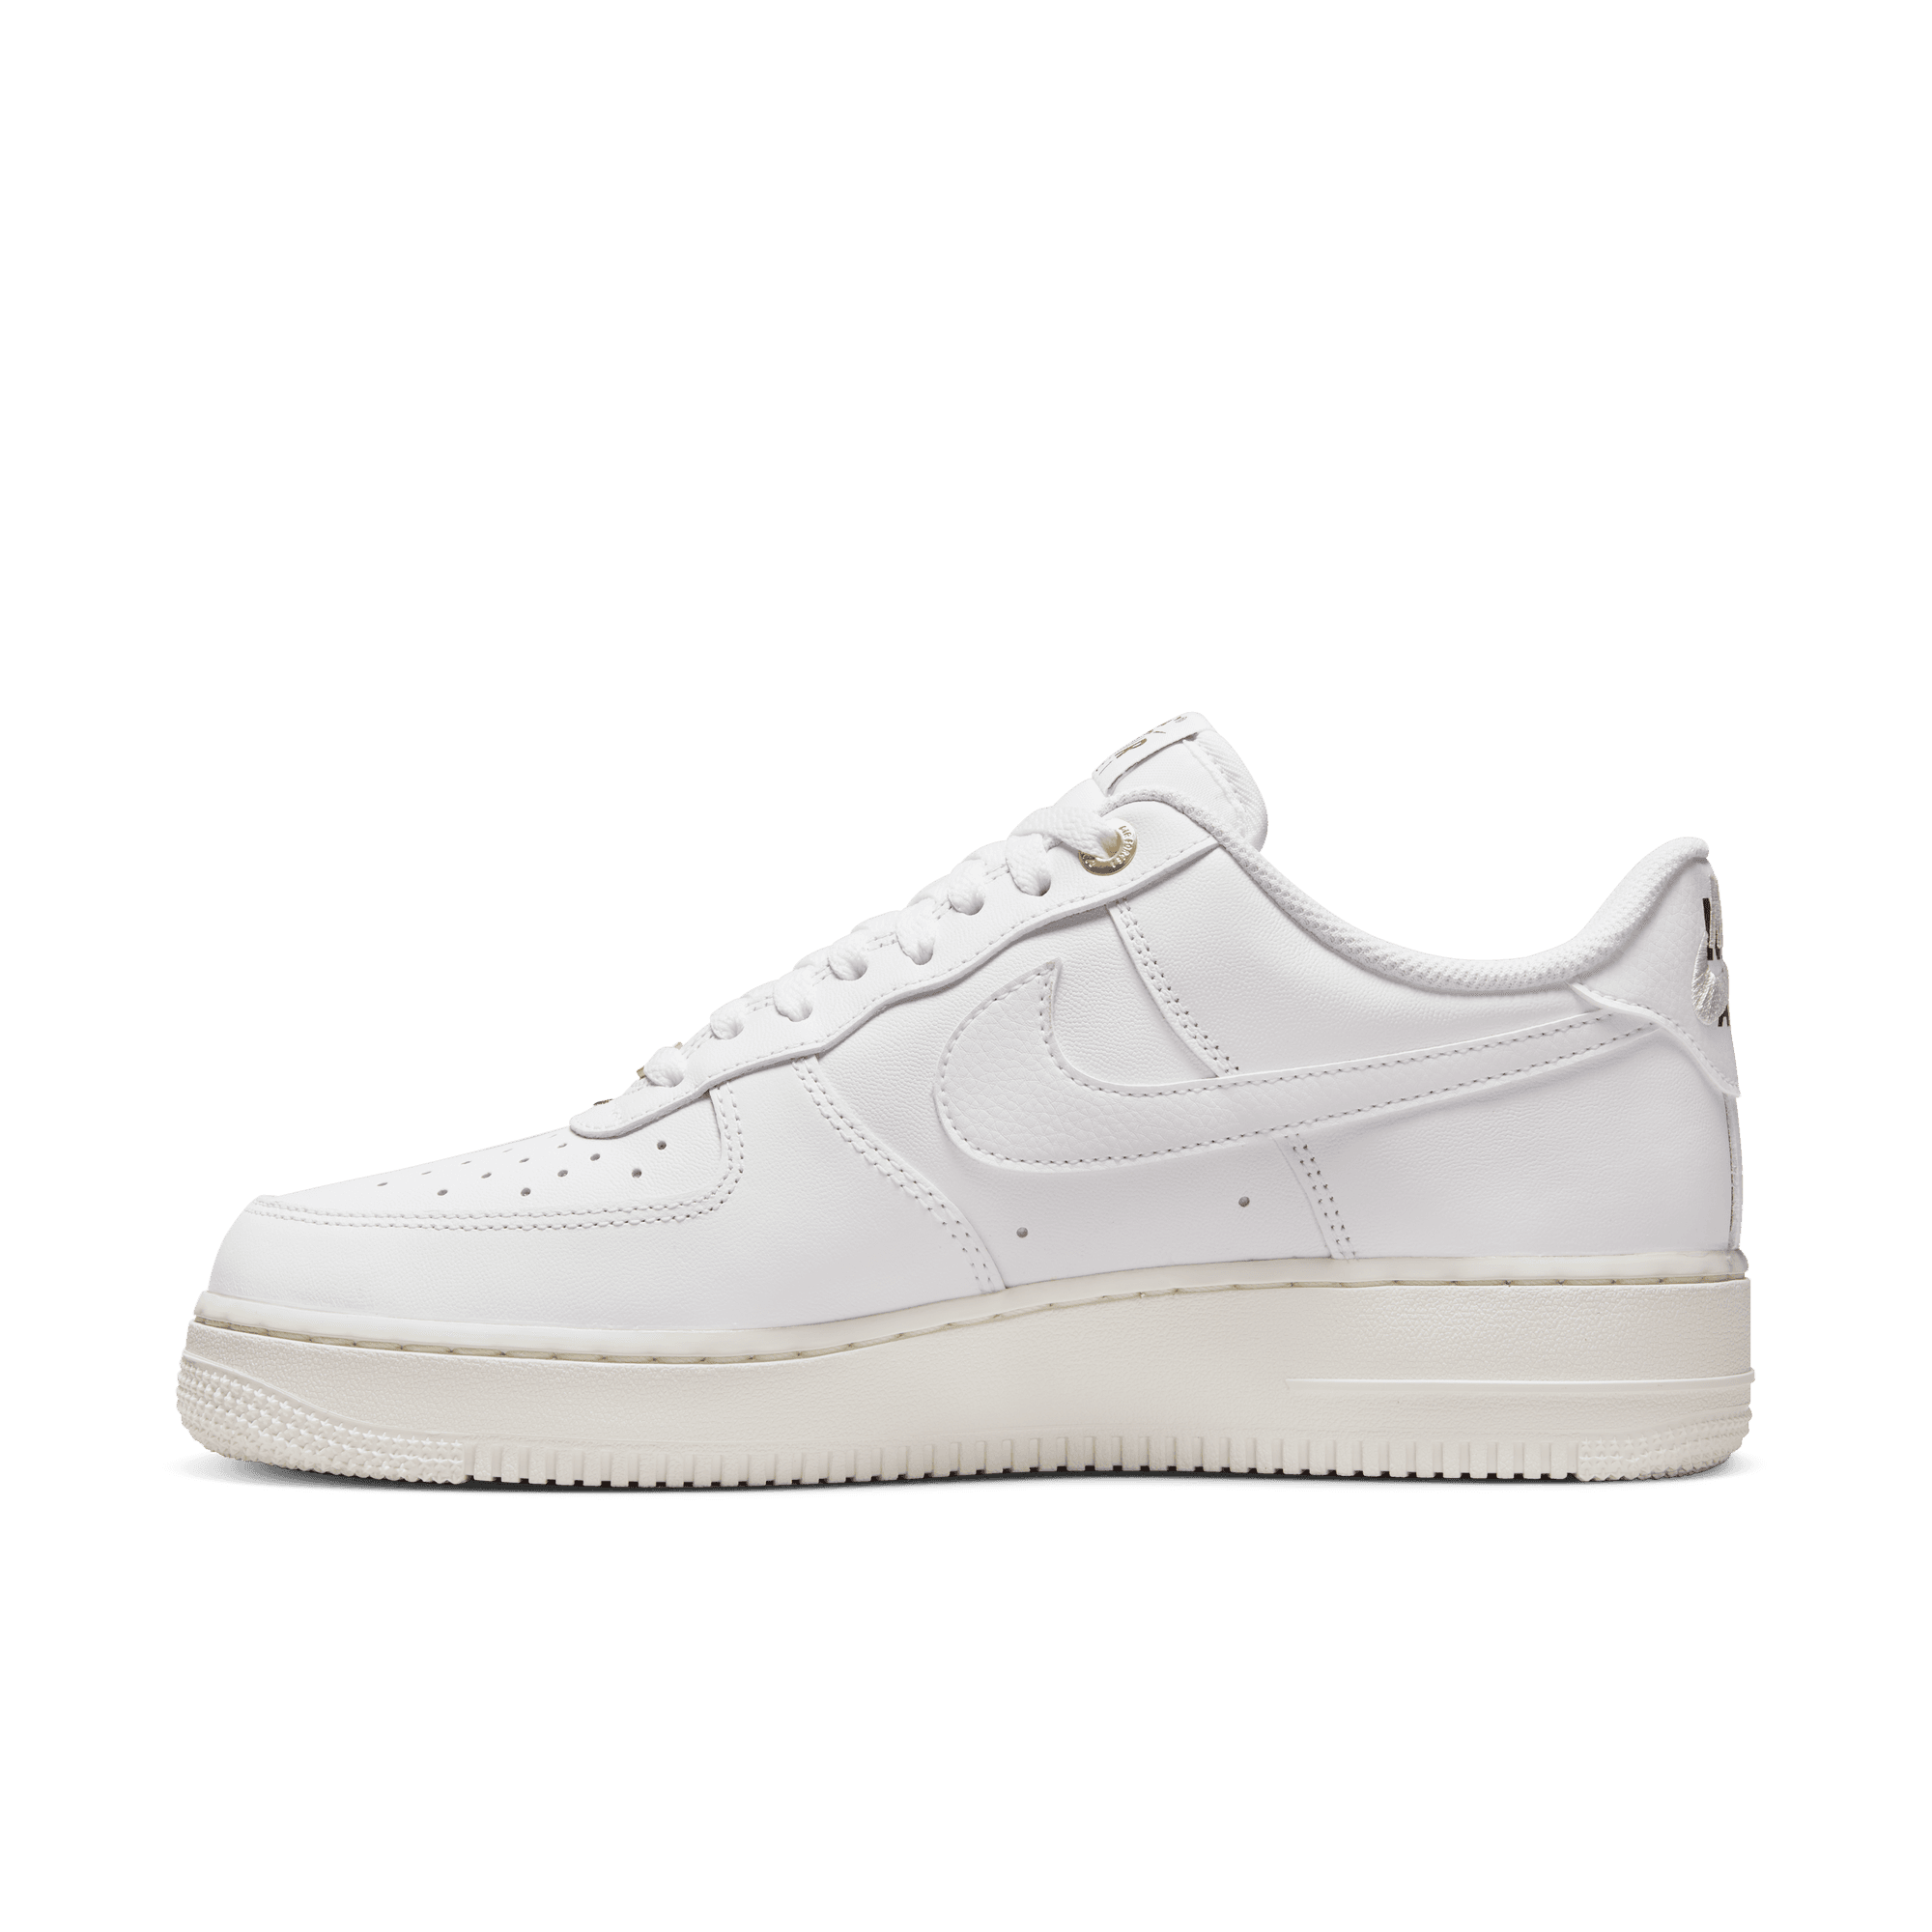 Nike Air Force 1 '07 LV8 Shoes - Men's - GBNY